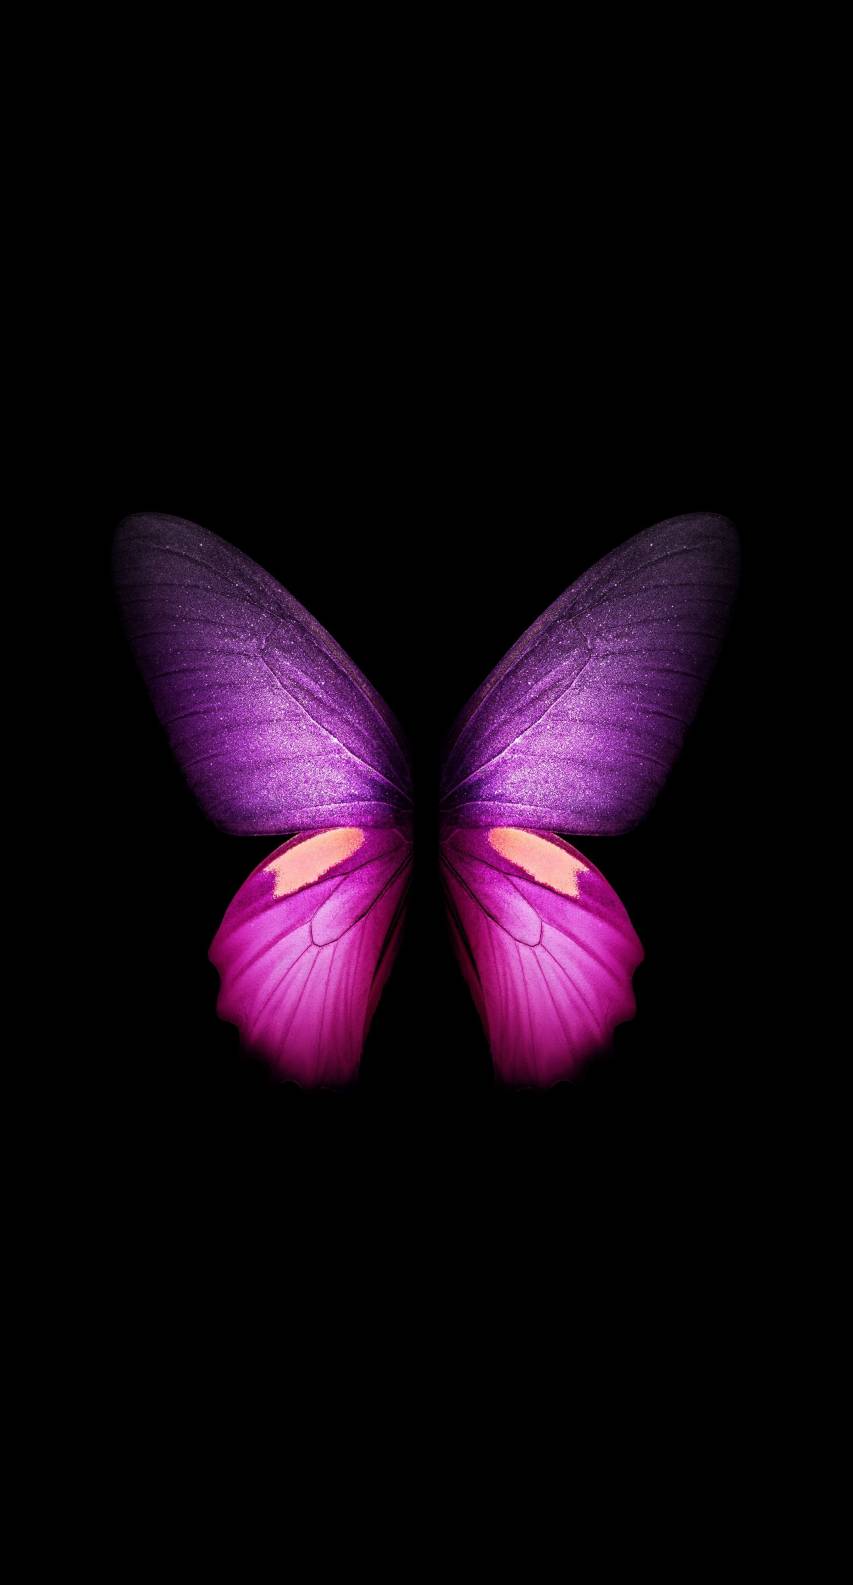 Butterfly Aesthetic 4k hd Background images for Phone